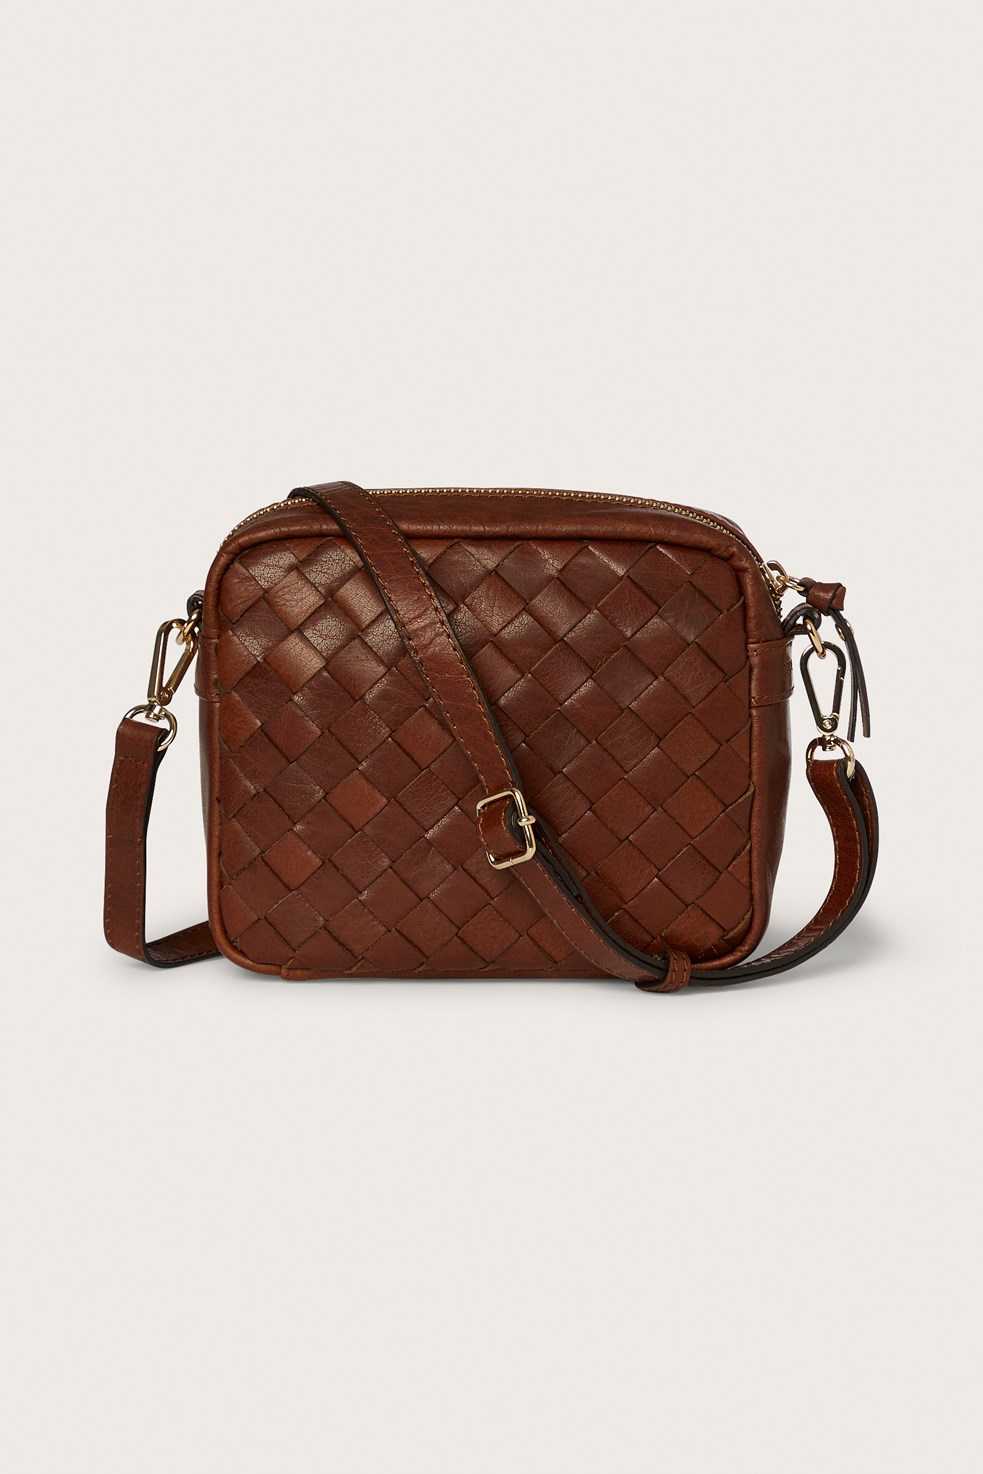 marqetstores.se | Stockh lm Irma braided leather bag